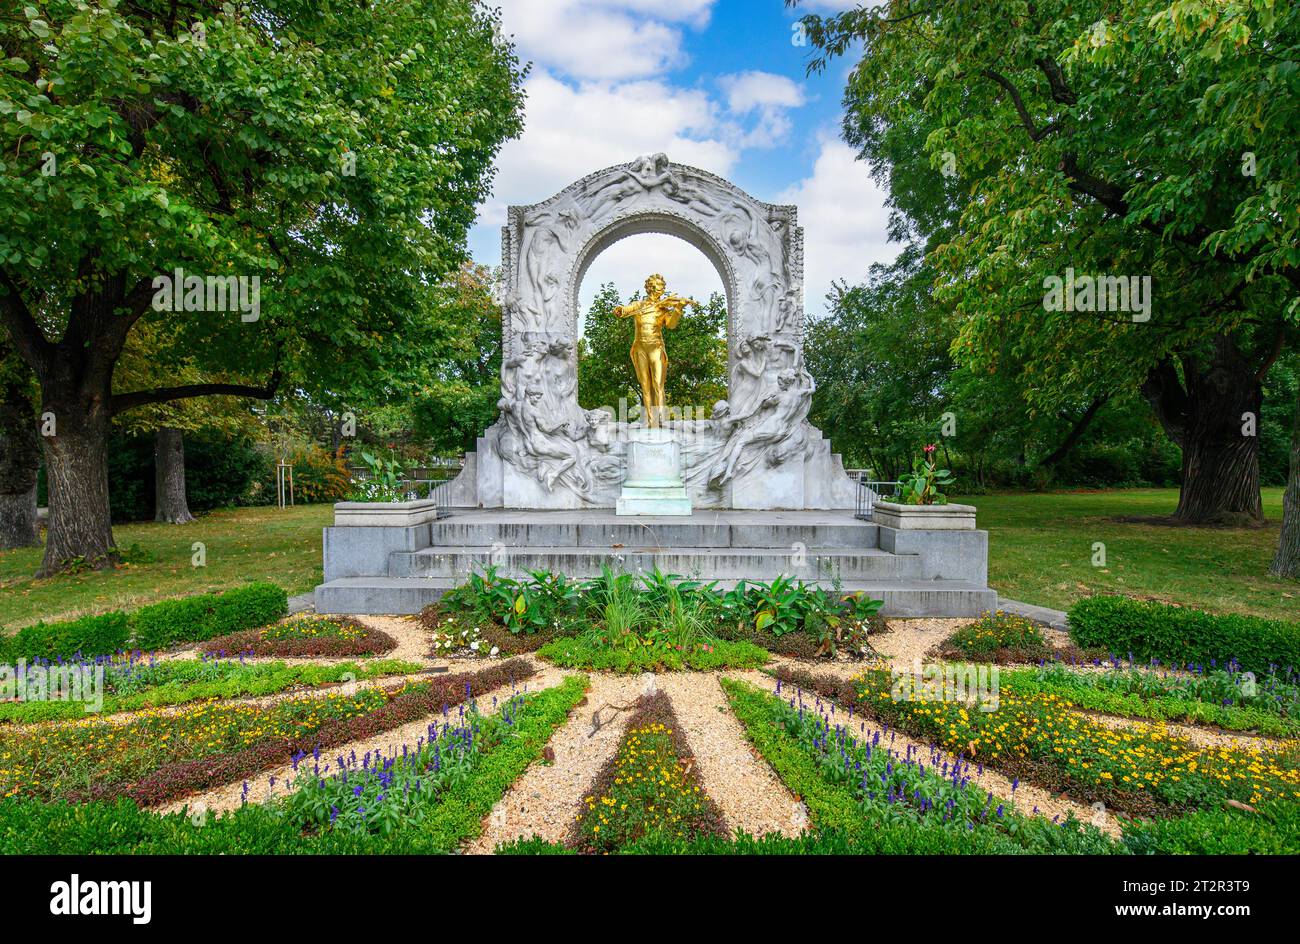 Vienna, Austria. Monument of Johann Strauss. Famous golden statue of great Austrian composer, playing violin in the Stadtpark (city park) Stock Photo